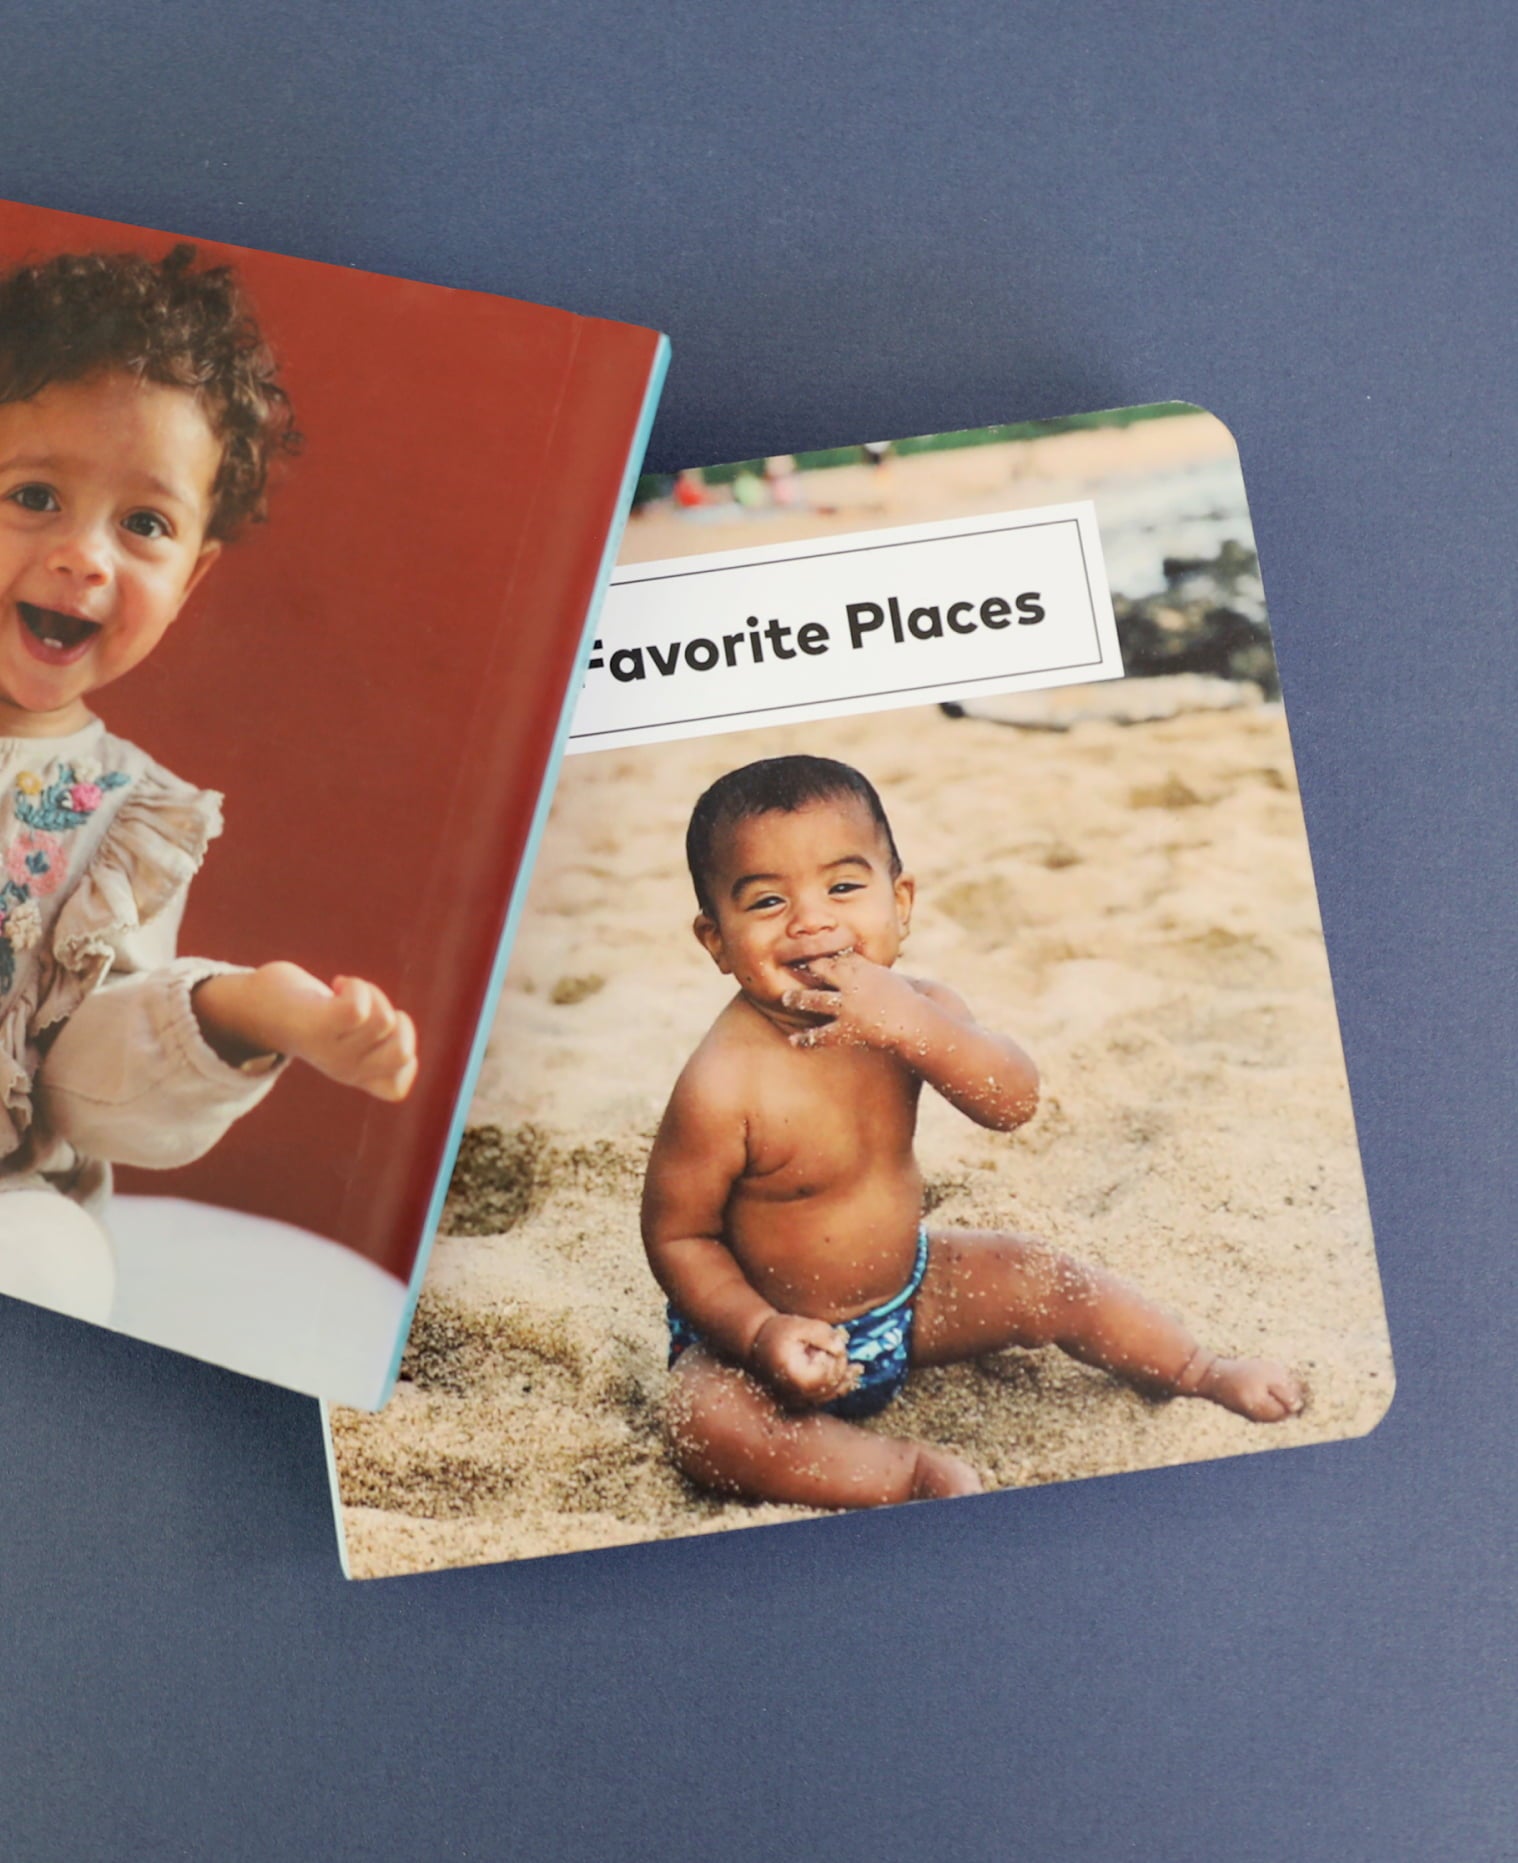 Overlapping Baby Board Book back cover with Baby Board Book Favorite Places Theme front cover